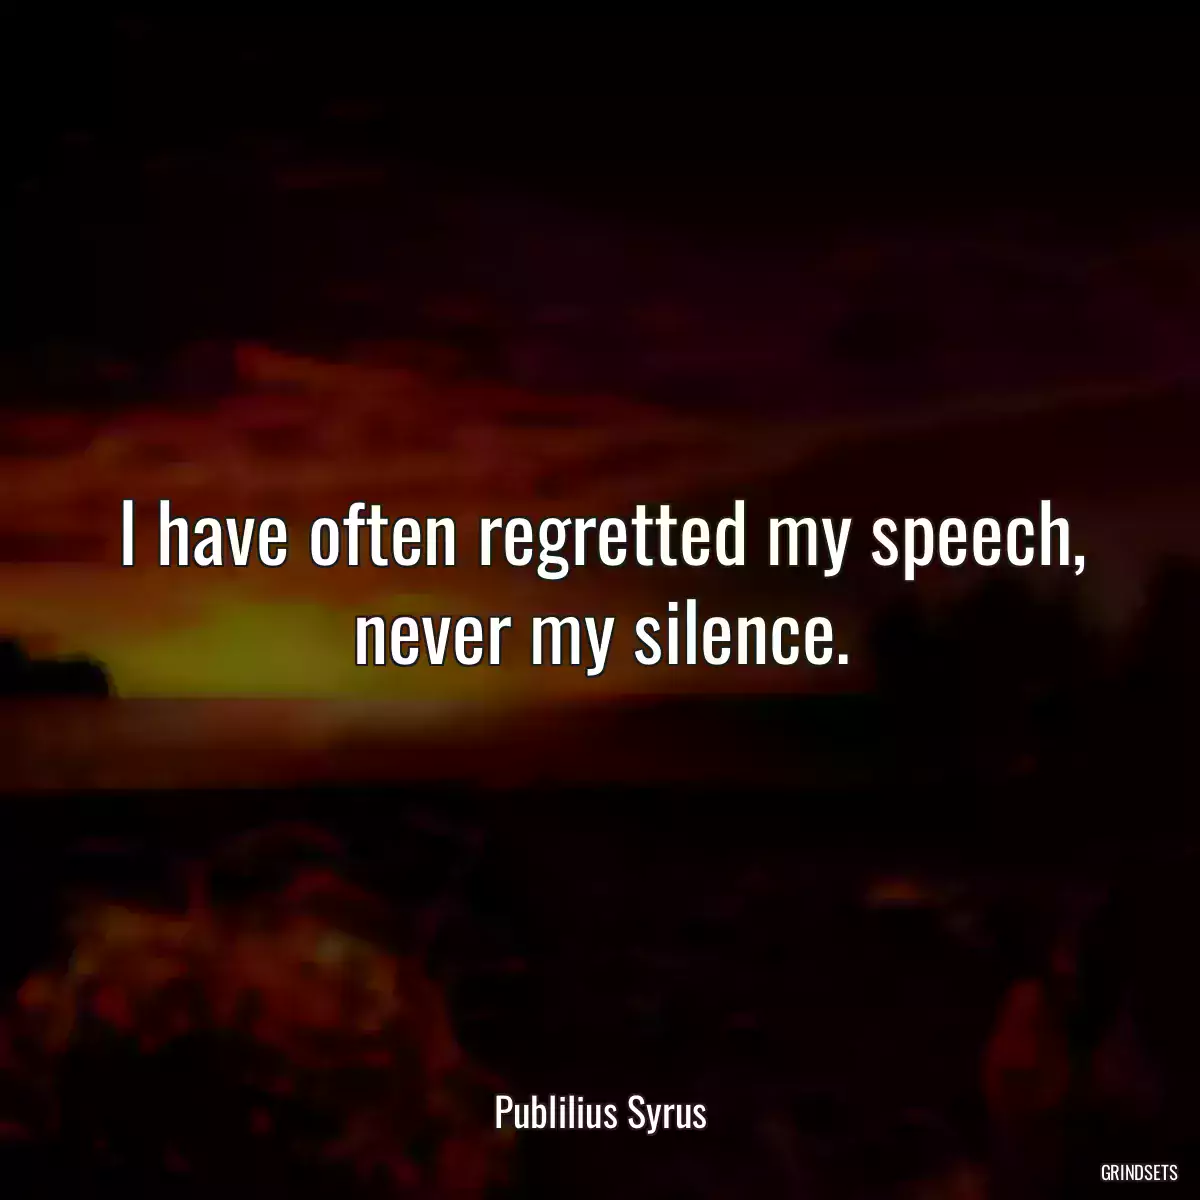 I have often regretted my speech, never my silence.